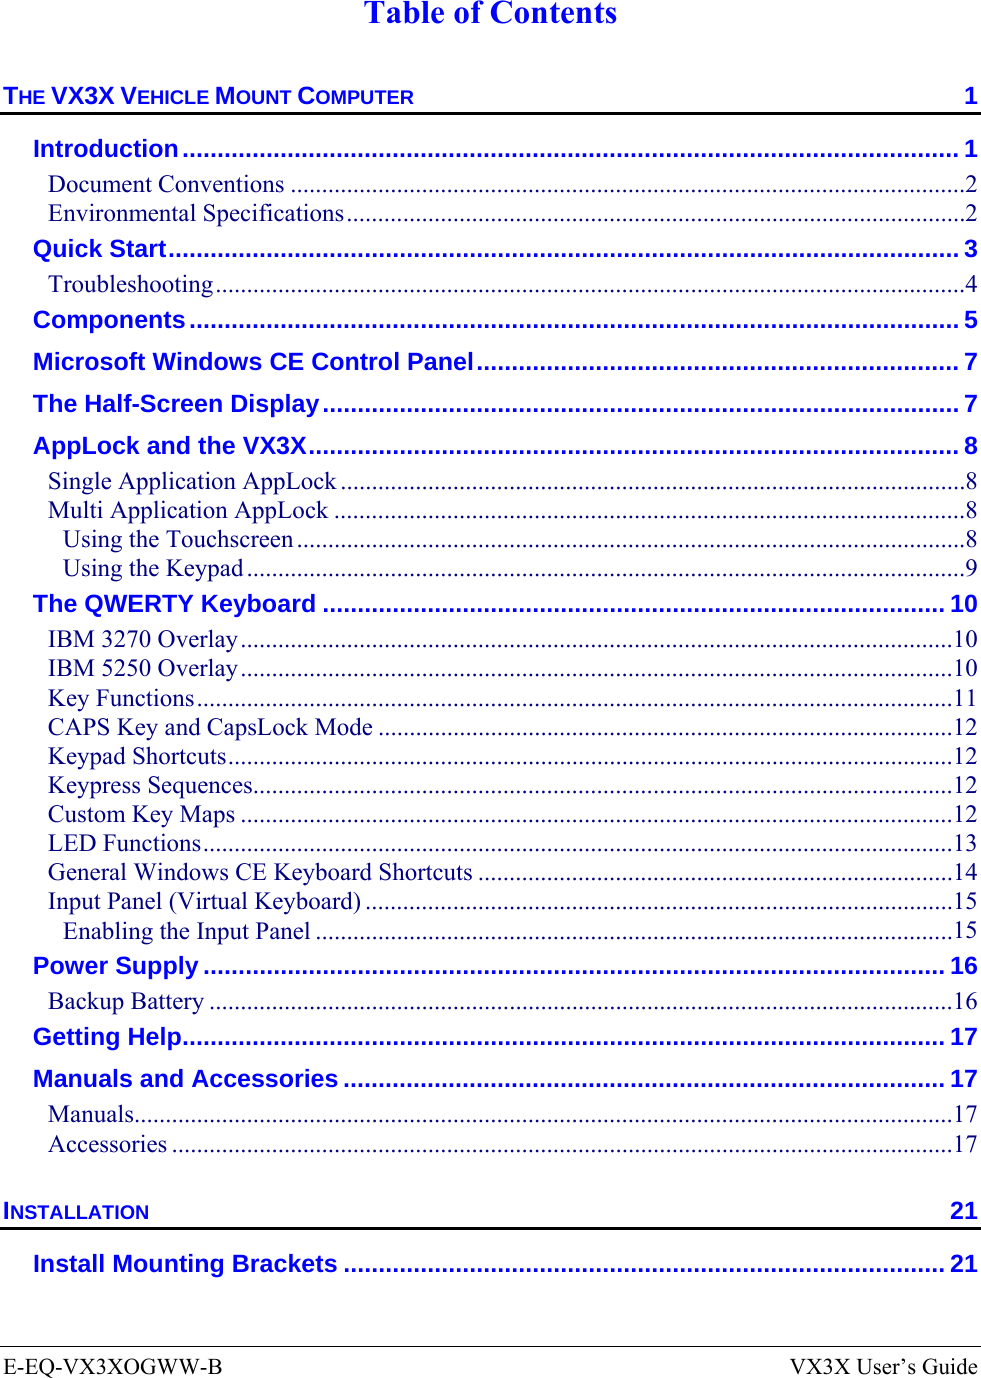  E-EQ-VX3XOGWW-B  VX3X User’s Guide  Table of Contents THE VX3X VEHICLE MOUNT COMPUTER  1 Introduction............................................................................................................... 1 Document Conventions ............................................................................................................2 Environmental Specifications...................................................................................................2 Quick Start................................................................................................................. 3 Troubleshooting........................................................................................................................4 Components.............................................................................................................. 5 Microsoft Windows CE Control Panel..................................................................... 7 The Half-Screen Display........................................................................................... 7 AppLock and the VX3X............................................................................................. 8 Single Application AppLock ....................................................................................................8 Multi Application AppLock .....................................................................................................8 Using the Touchscreen ...........................................................................................................8 Using the Keypad ...................................................................................................................9 The QWERTY Keyboard ......................................................................................... 10 IBM 3270 Overlay..................................................................................................................10 IBM 5250 Overlay..................................................................................................................10 Key Functions.........................................................................................................................11 CAPS Key and CapsLock Mode ............................................................................................12 Keypad Shortcuts....................................................................................................................12 Keypress Sequences................................................................................................................12 Custom Key Maps ..................................................................................................................12 LED Functions........................................................................................................................13 General Windows CE Keyboard Shortcuts ............................................................................14 Input Panel (Virtual Keyboard) ..............................................................................................15 Enabling the Input Panel ......................................................................................................15 Power Supply .......................................................................................................... 16 Backup Battery .......................................................................................................................16 Getting Help............................................................................................................. 17 Manuals and Accessories ...................................................................................... 17 Manuals...................................................................................................................................17 Accessories .............................................................................................................................17 INSTALLATION 21 Install Mounting Brackets ...................................................................................... 21 